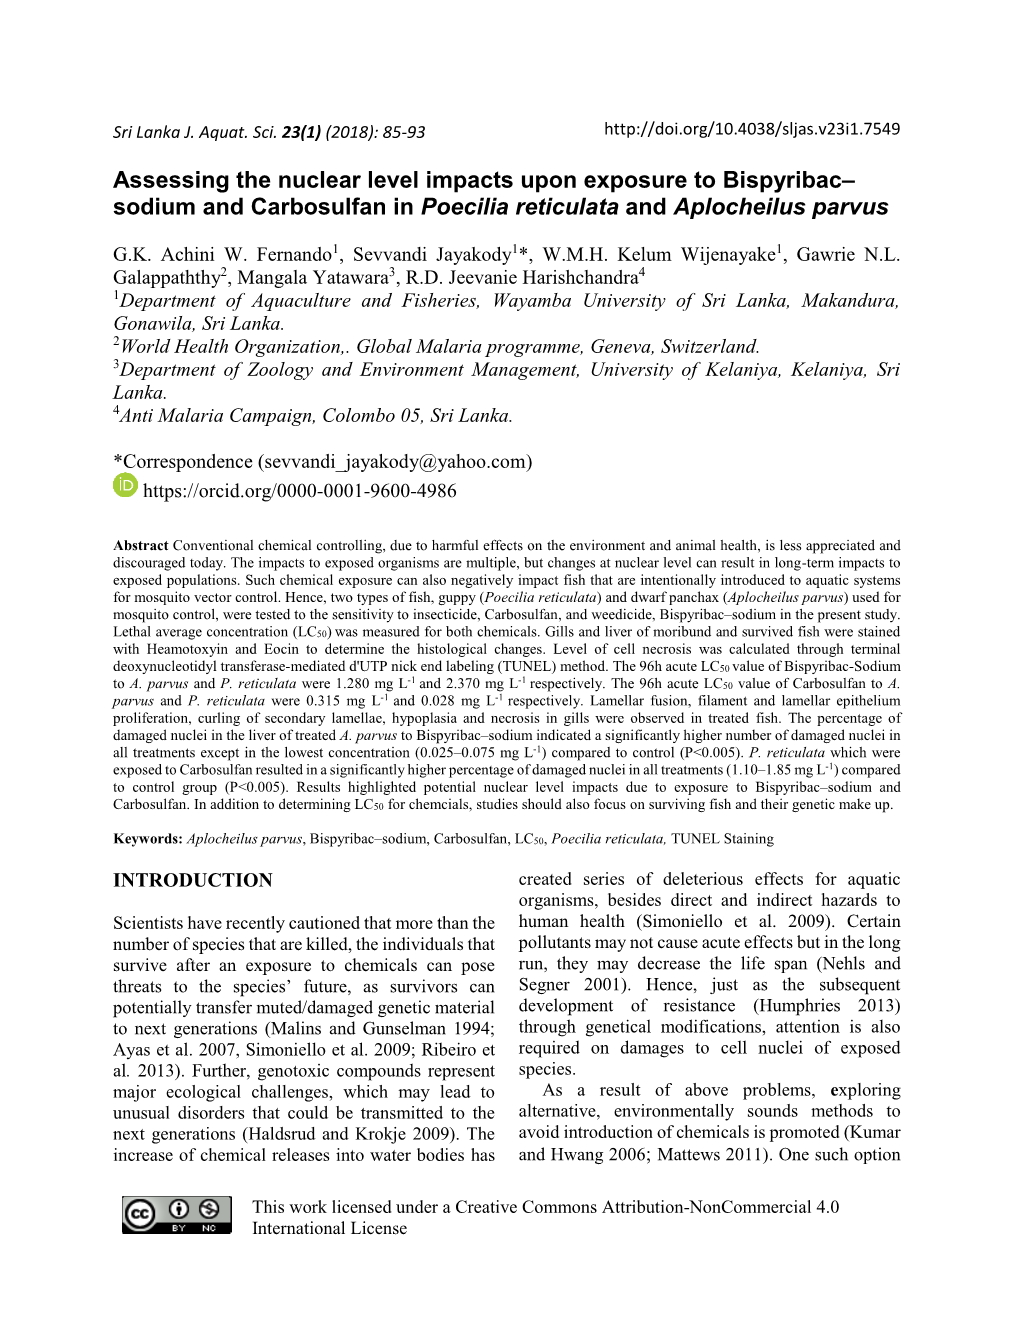 Assessing the Nuclear Level Impacts Upon Exposure to Bispyribac–Sodium and Carbosulfan in Poecilia Reticulata and Aplocheilus Parvus